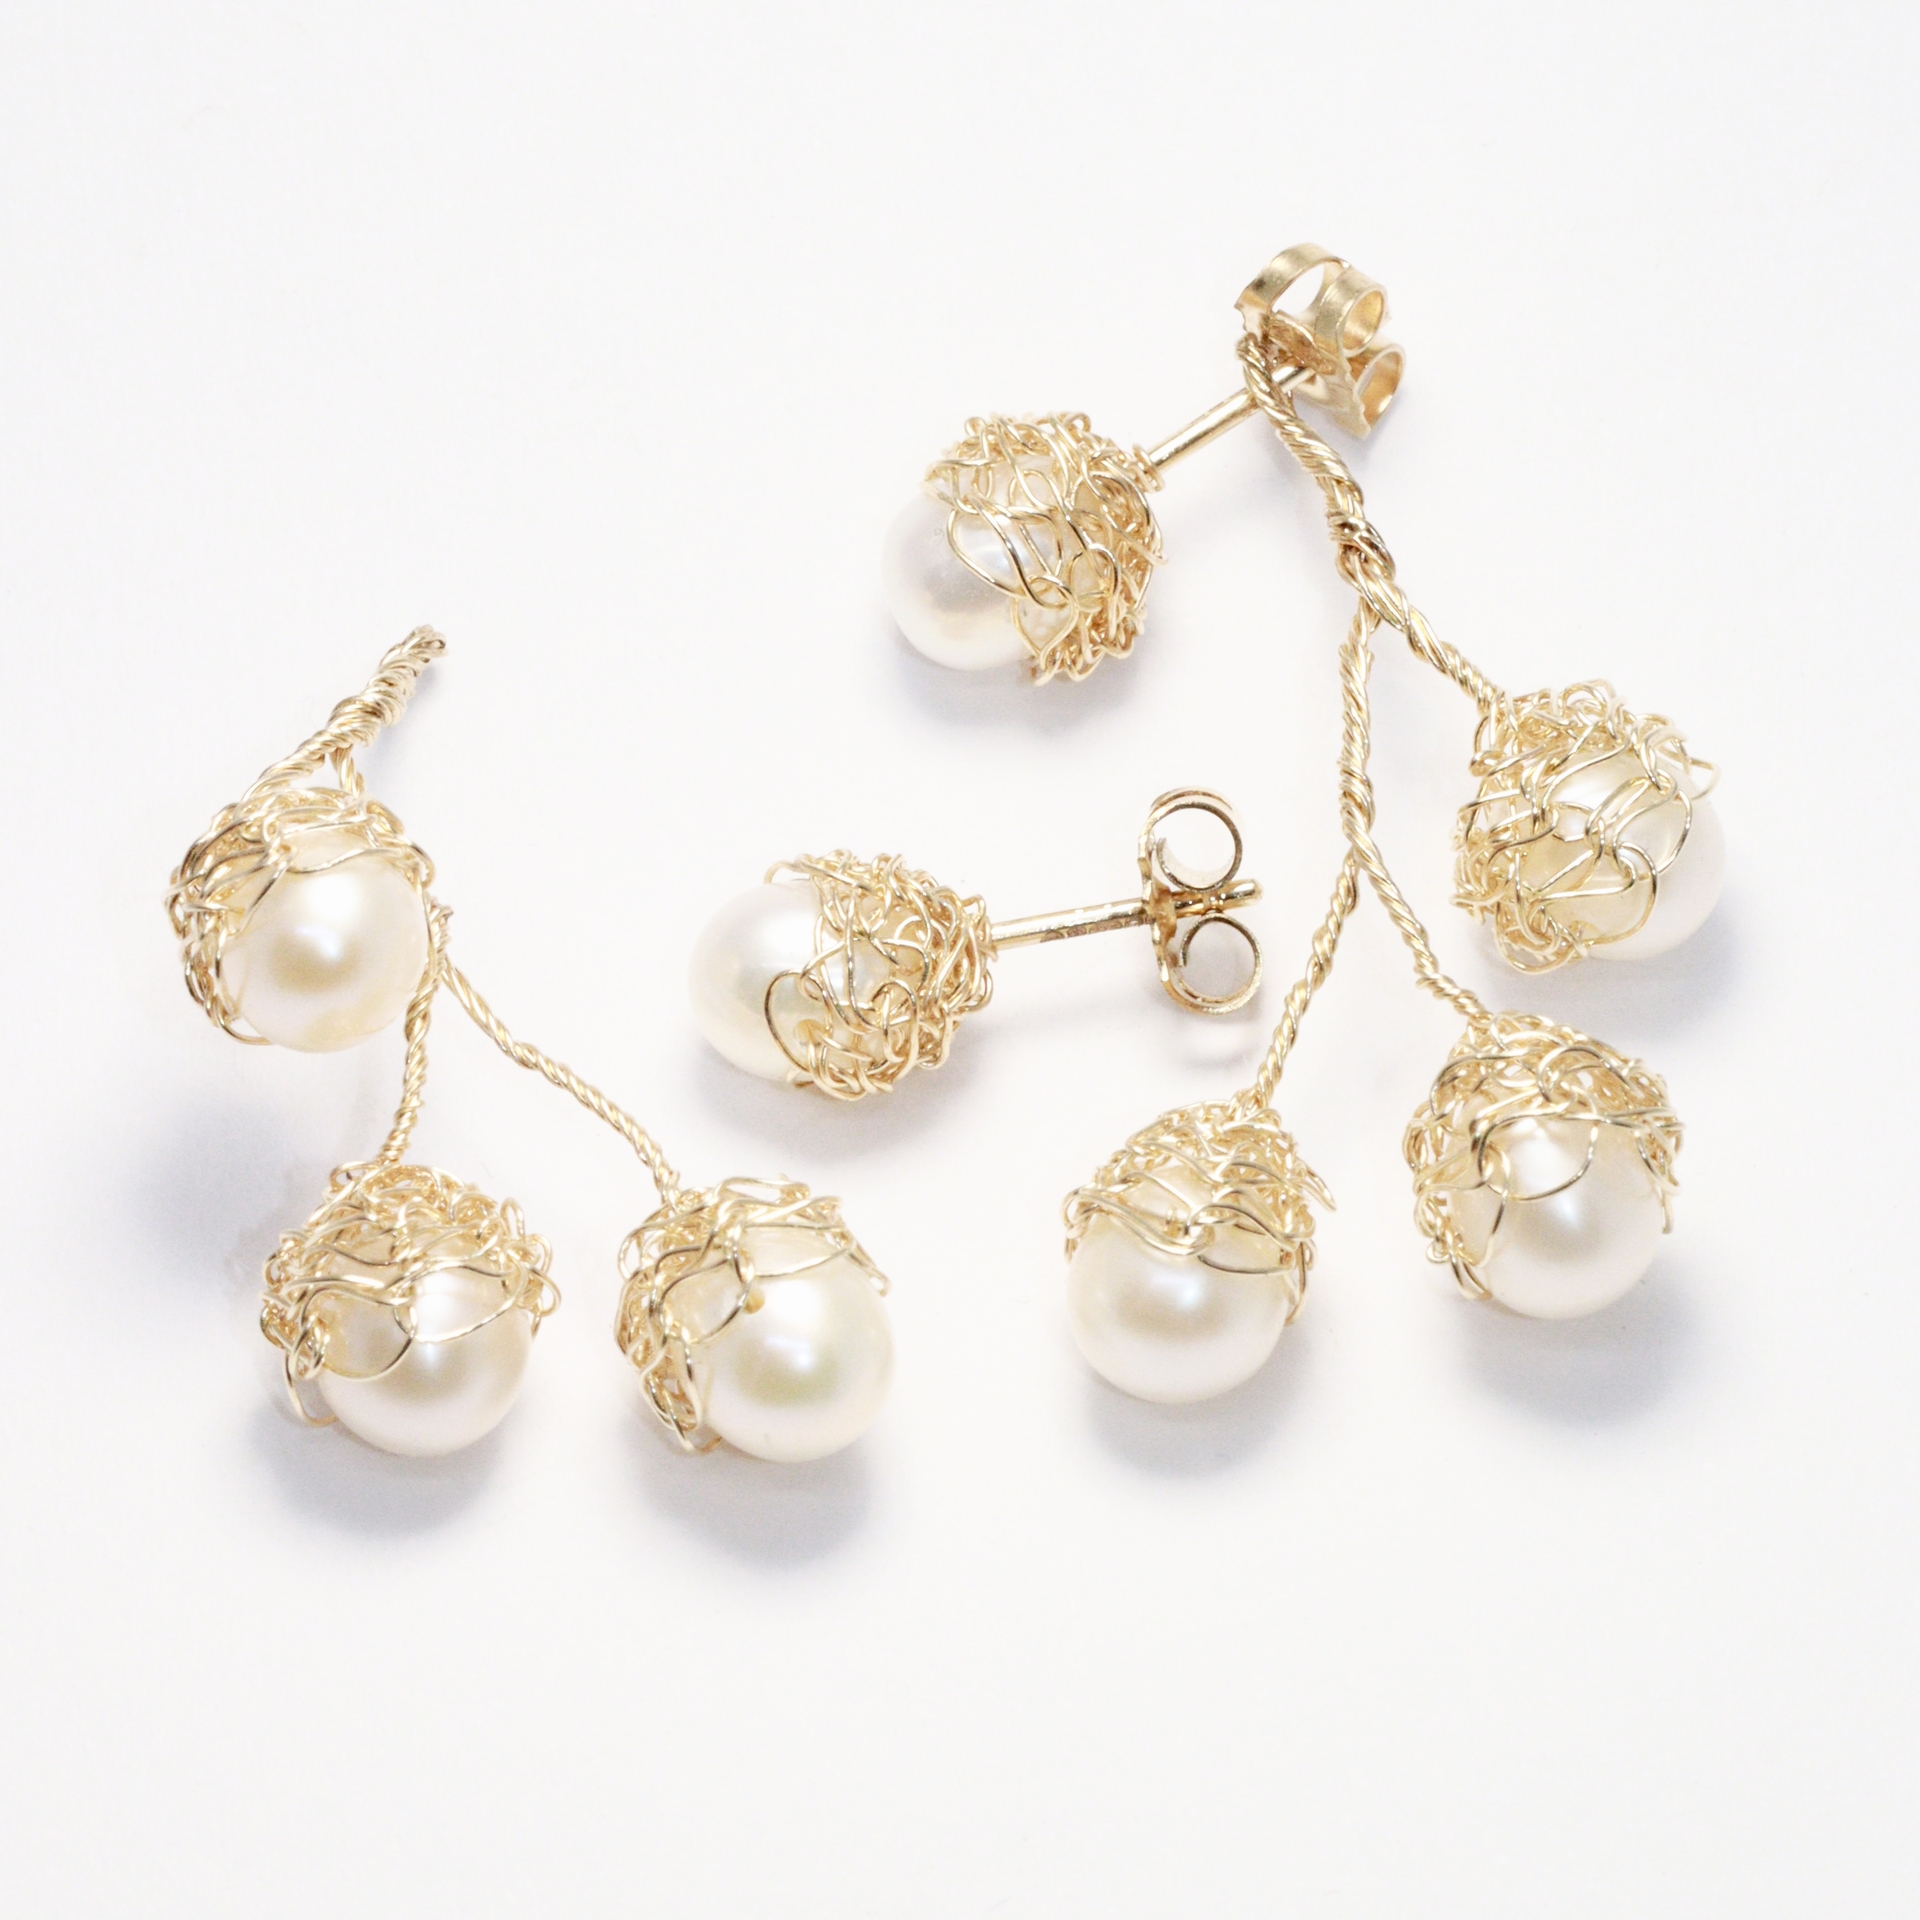 9ct Baya Pearl Studs with Removable Pearl Vine Drop